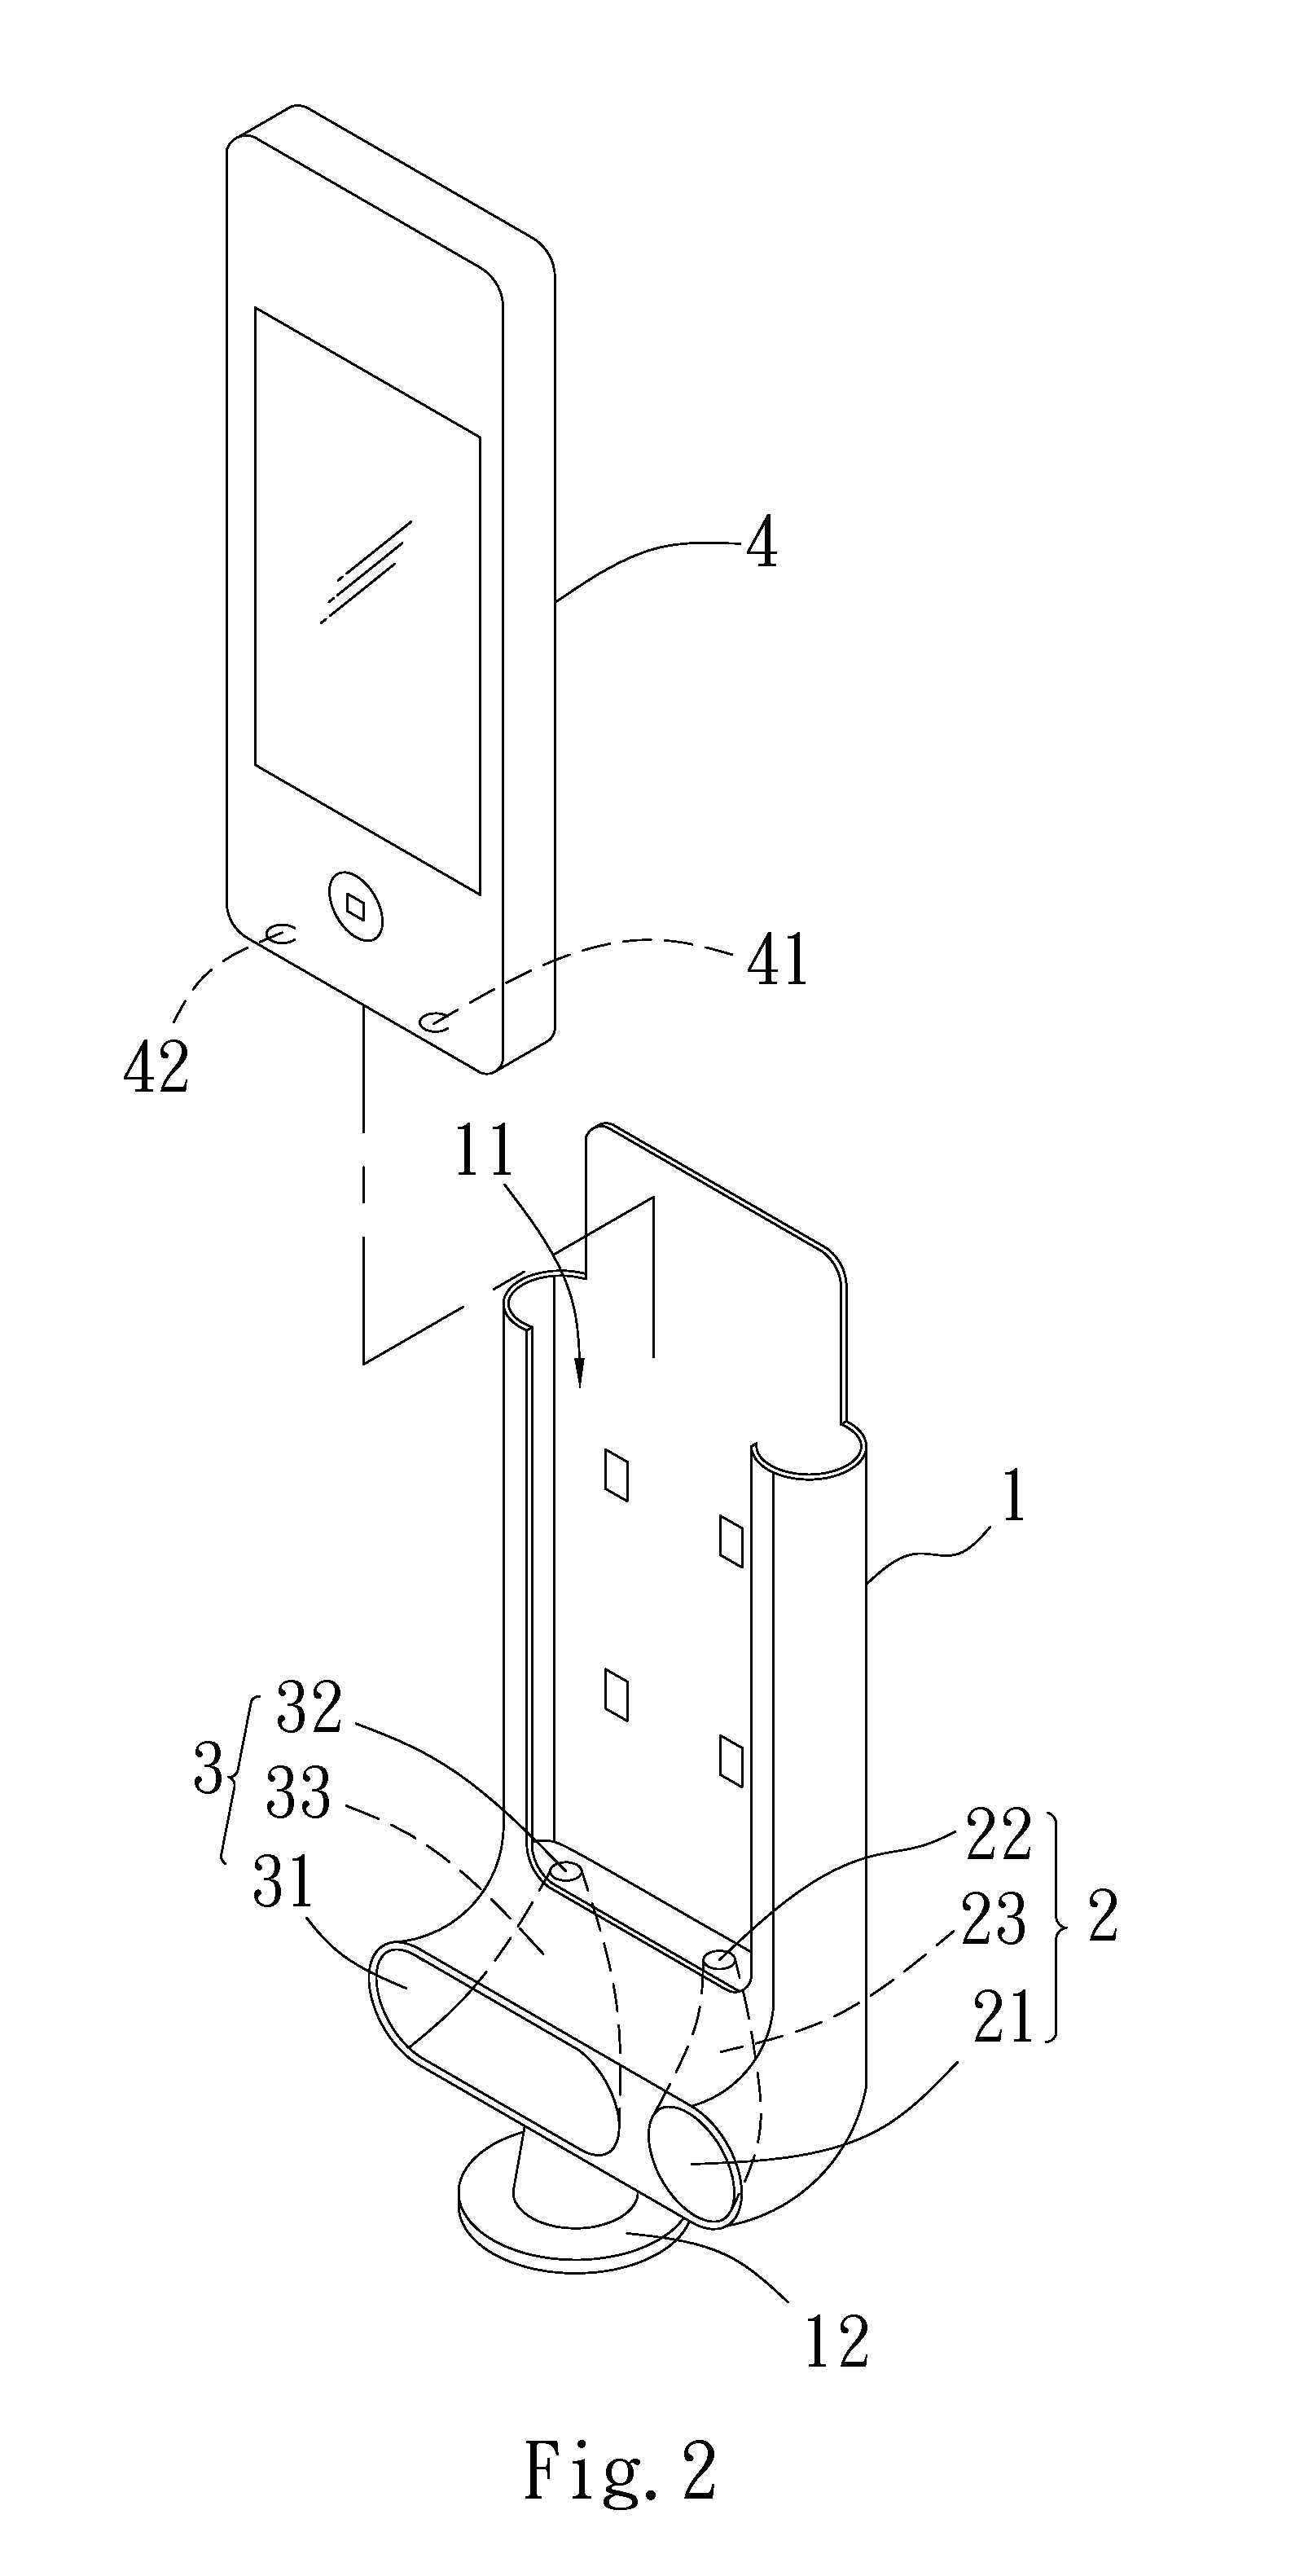 Electronic device disposing structure